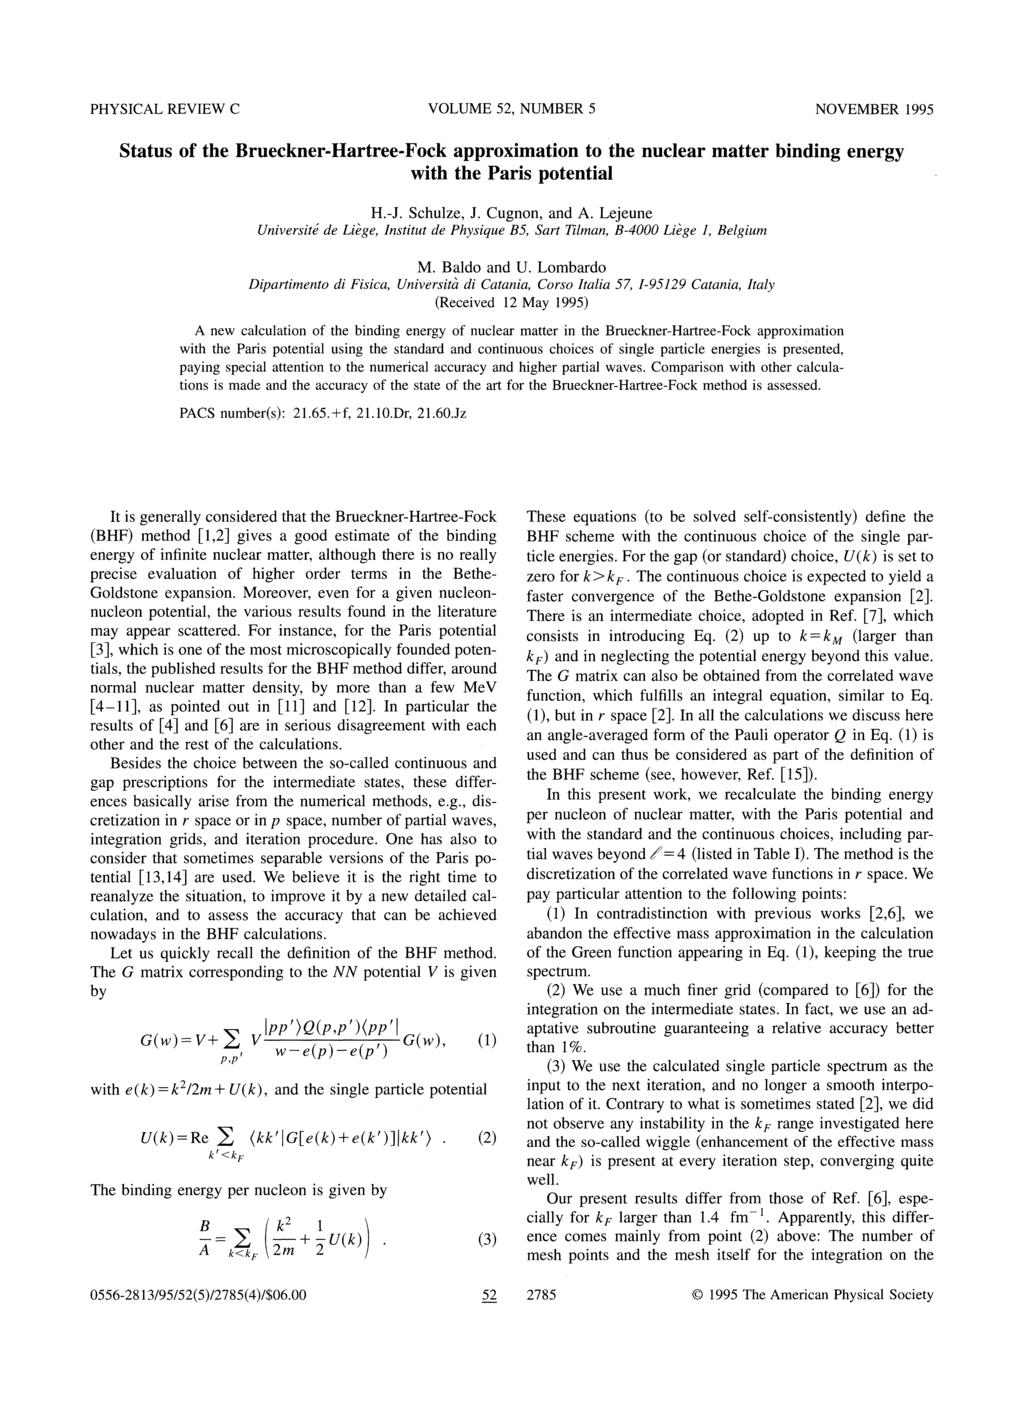 PHYSICAL REVIEW C VOLUME 52, NUMBER 5 NOVEMBER 1995 Status of the Brueckner-Hartree-Fock approximation to the nuclear matter binding energy with the Paris potential H.-J. Schulze, J. Cugnon, and A.